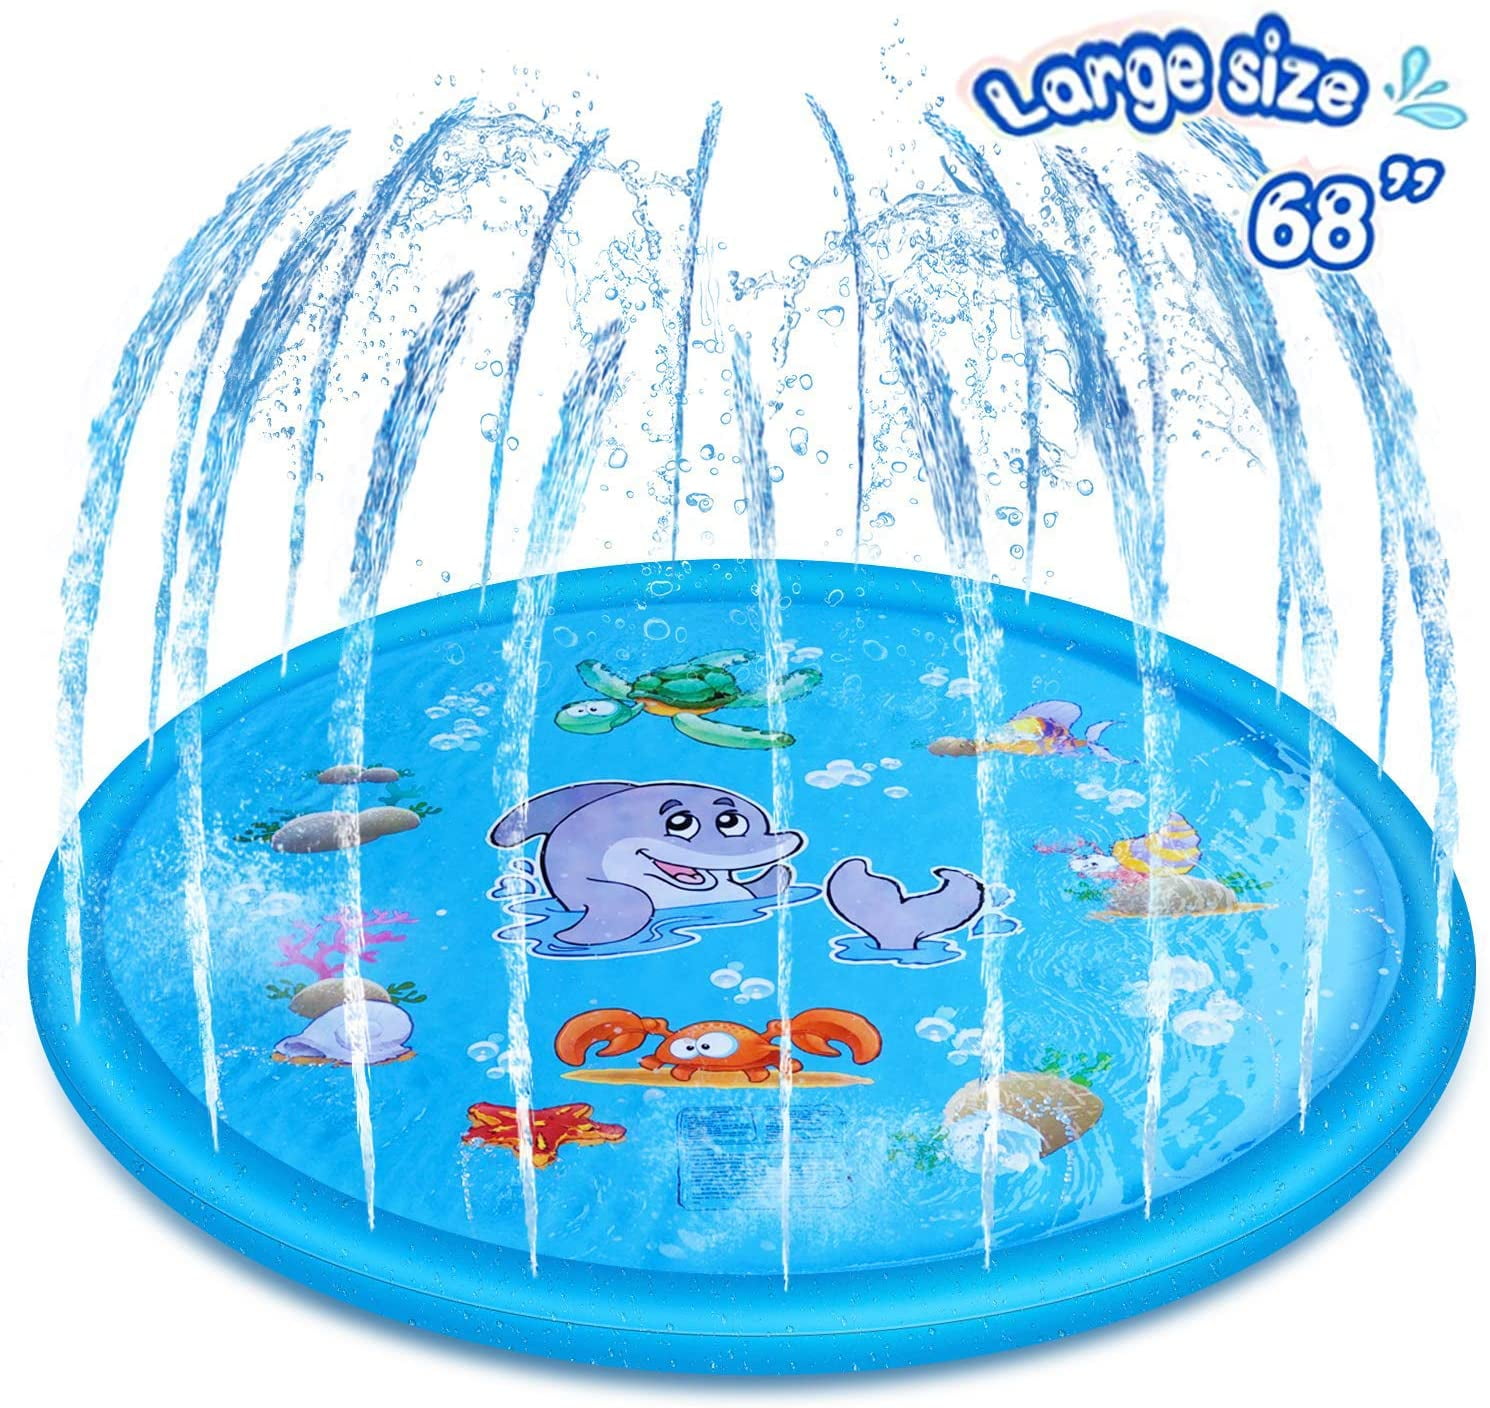 Splash Play Mat,Sprinkler pad 68 Perfect Outdoor Summer Inflatable Water Toys,Gift for Children Infants Toddlers,Boys,Girls and Kids 